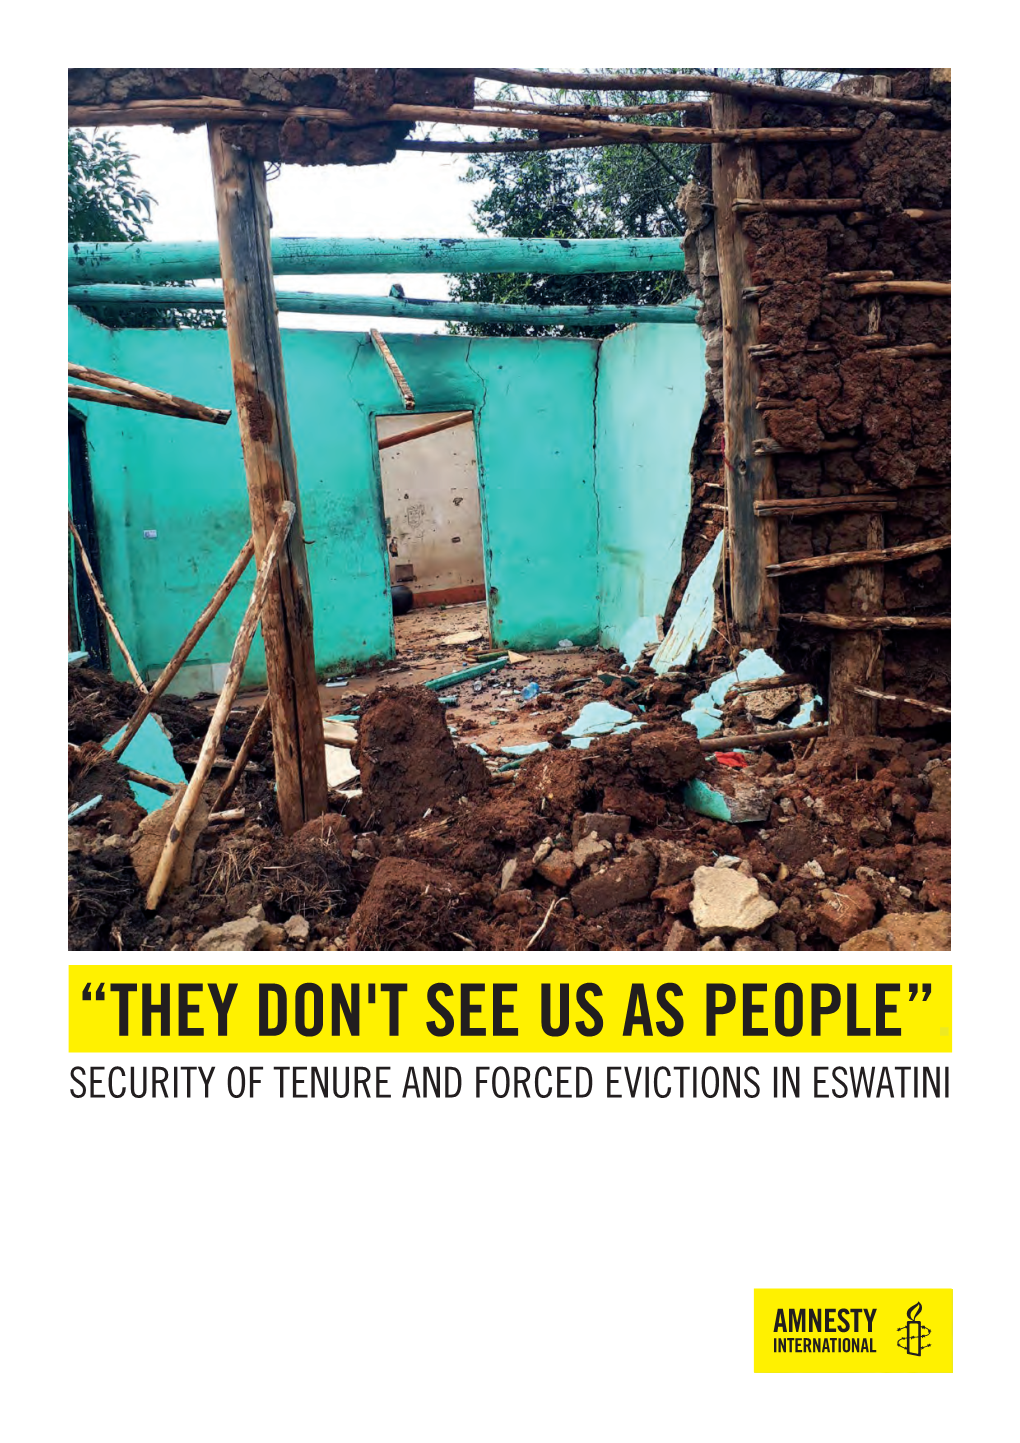 They Don't See Us As People: Security of Tenure and Forced Evictions In